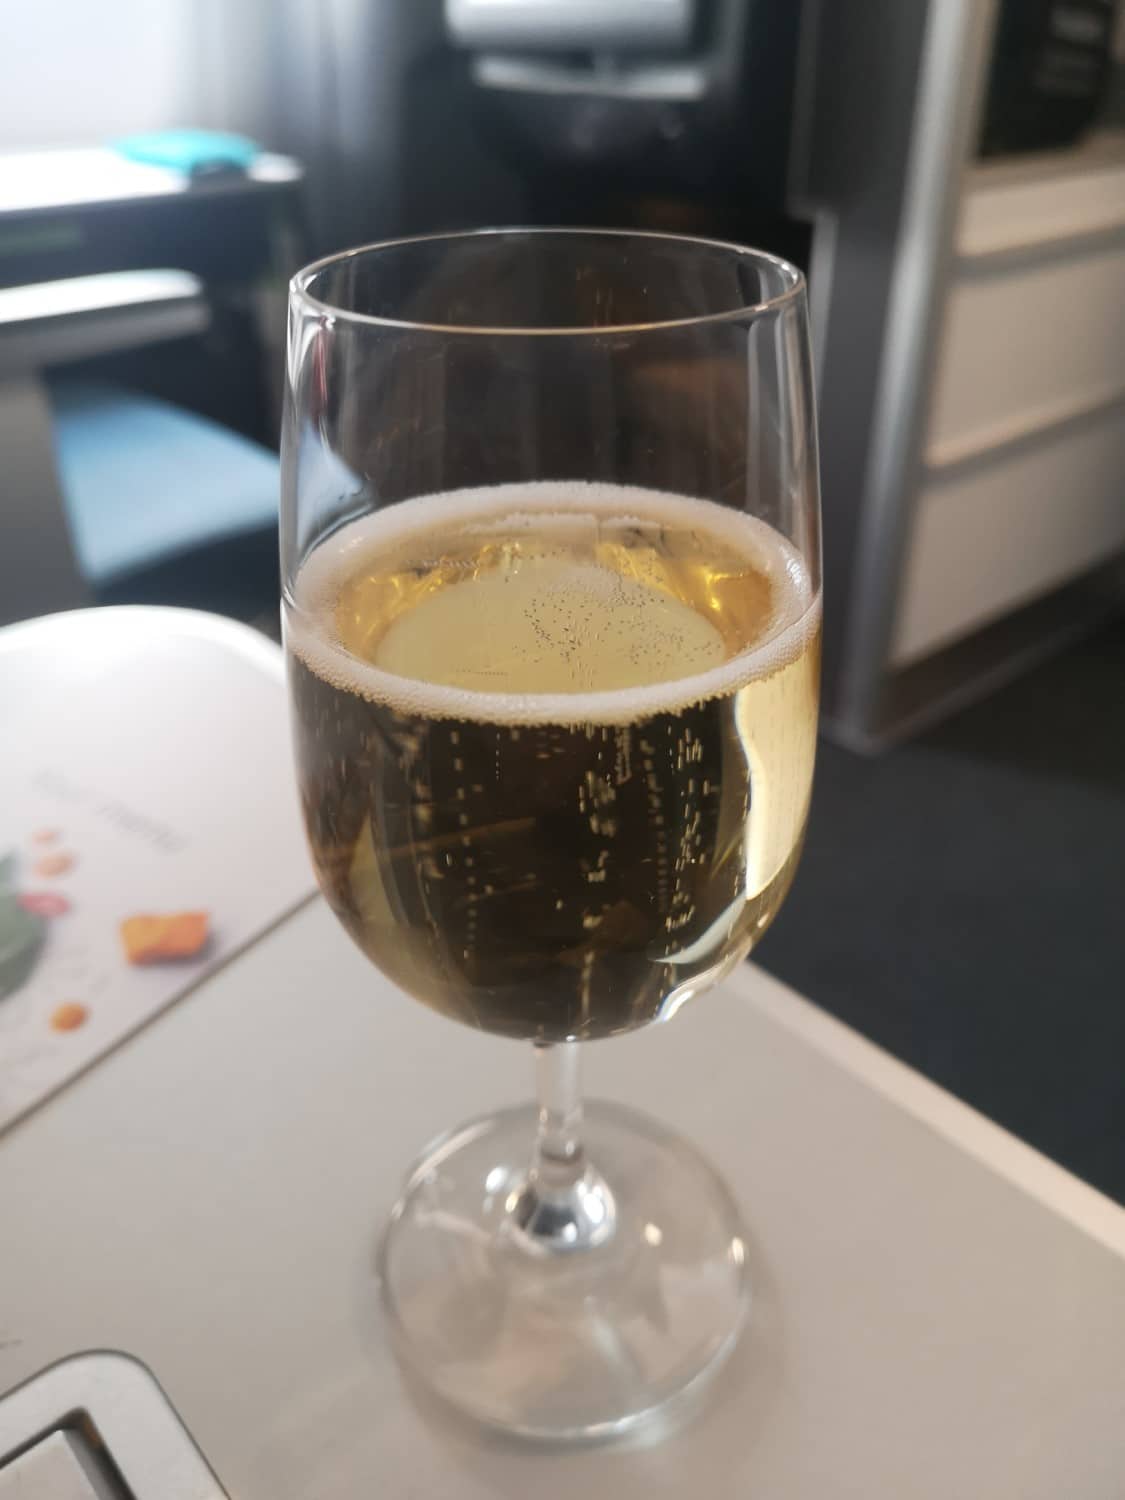 aer lingus business class champagne